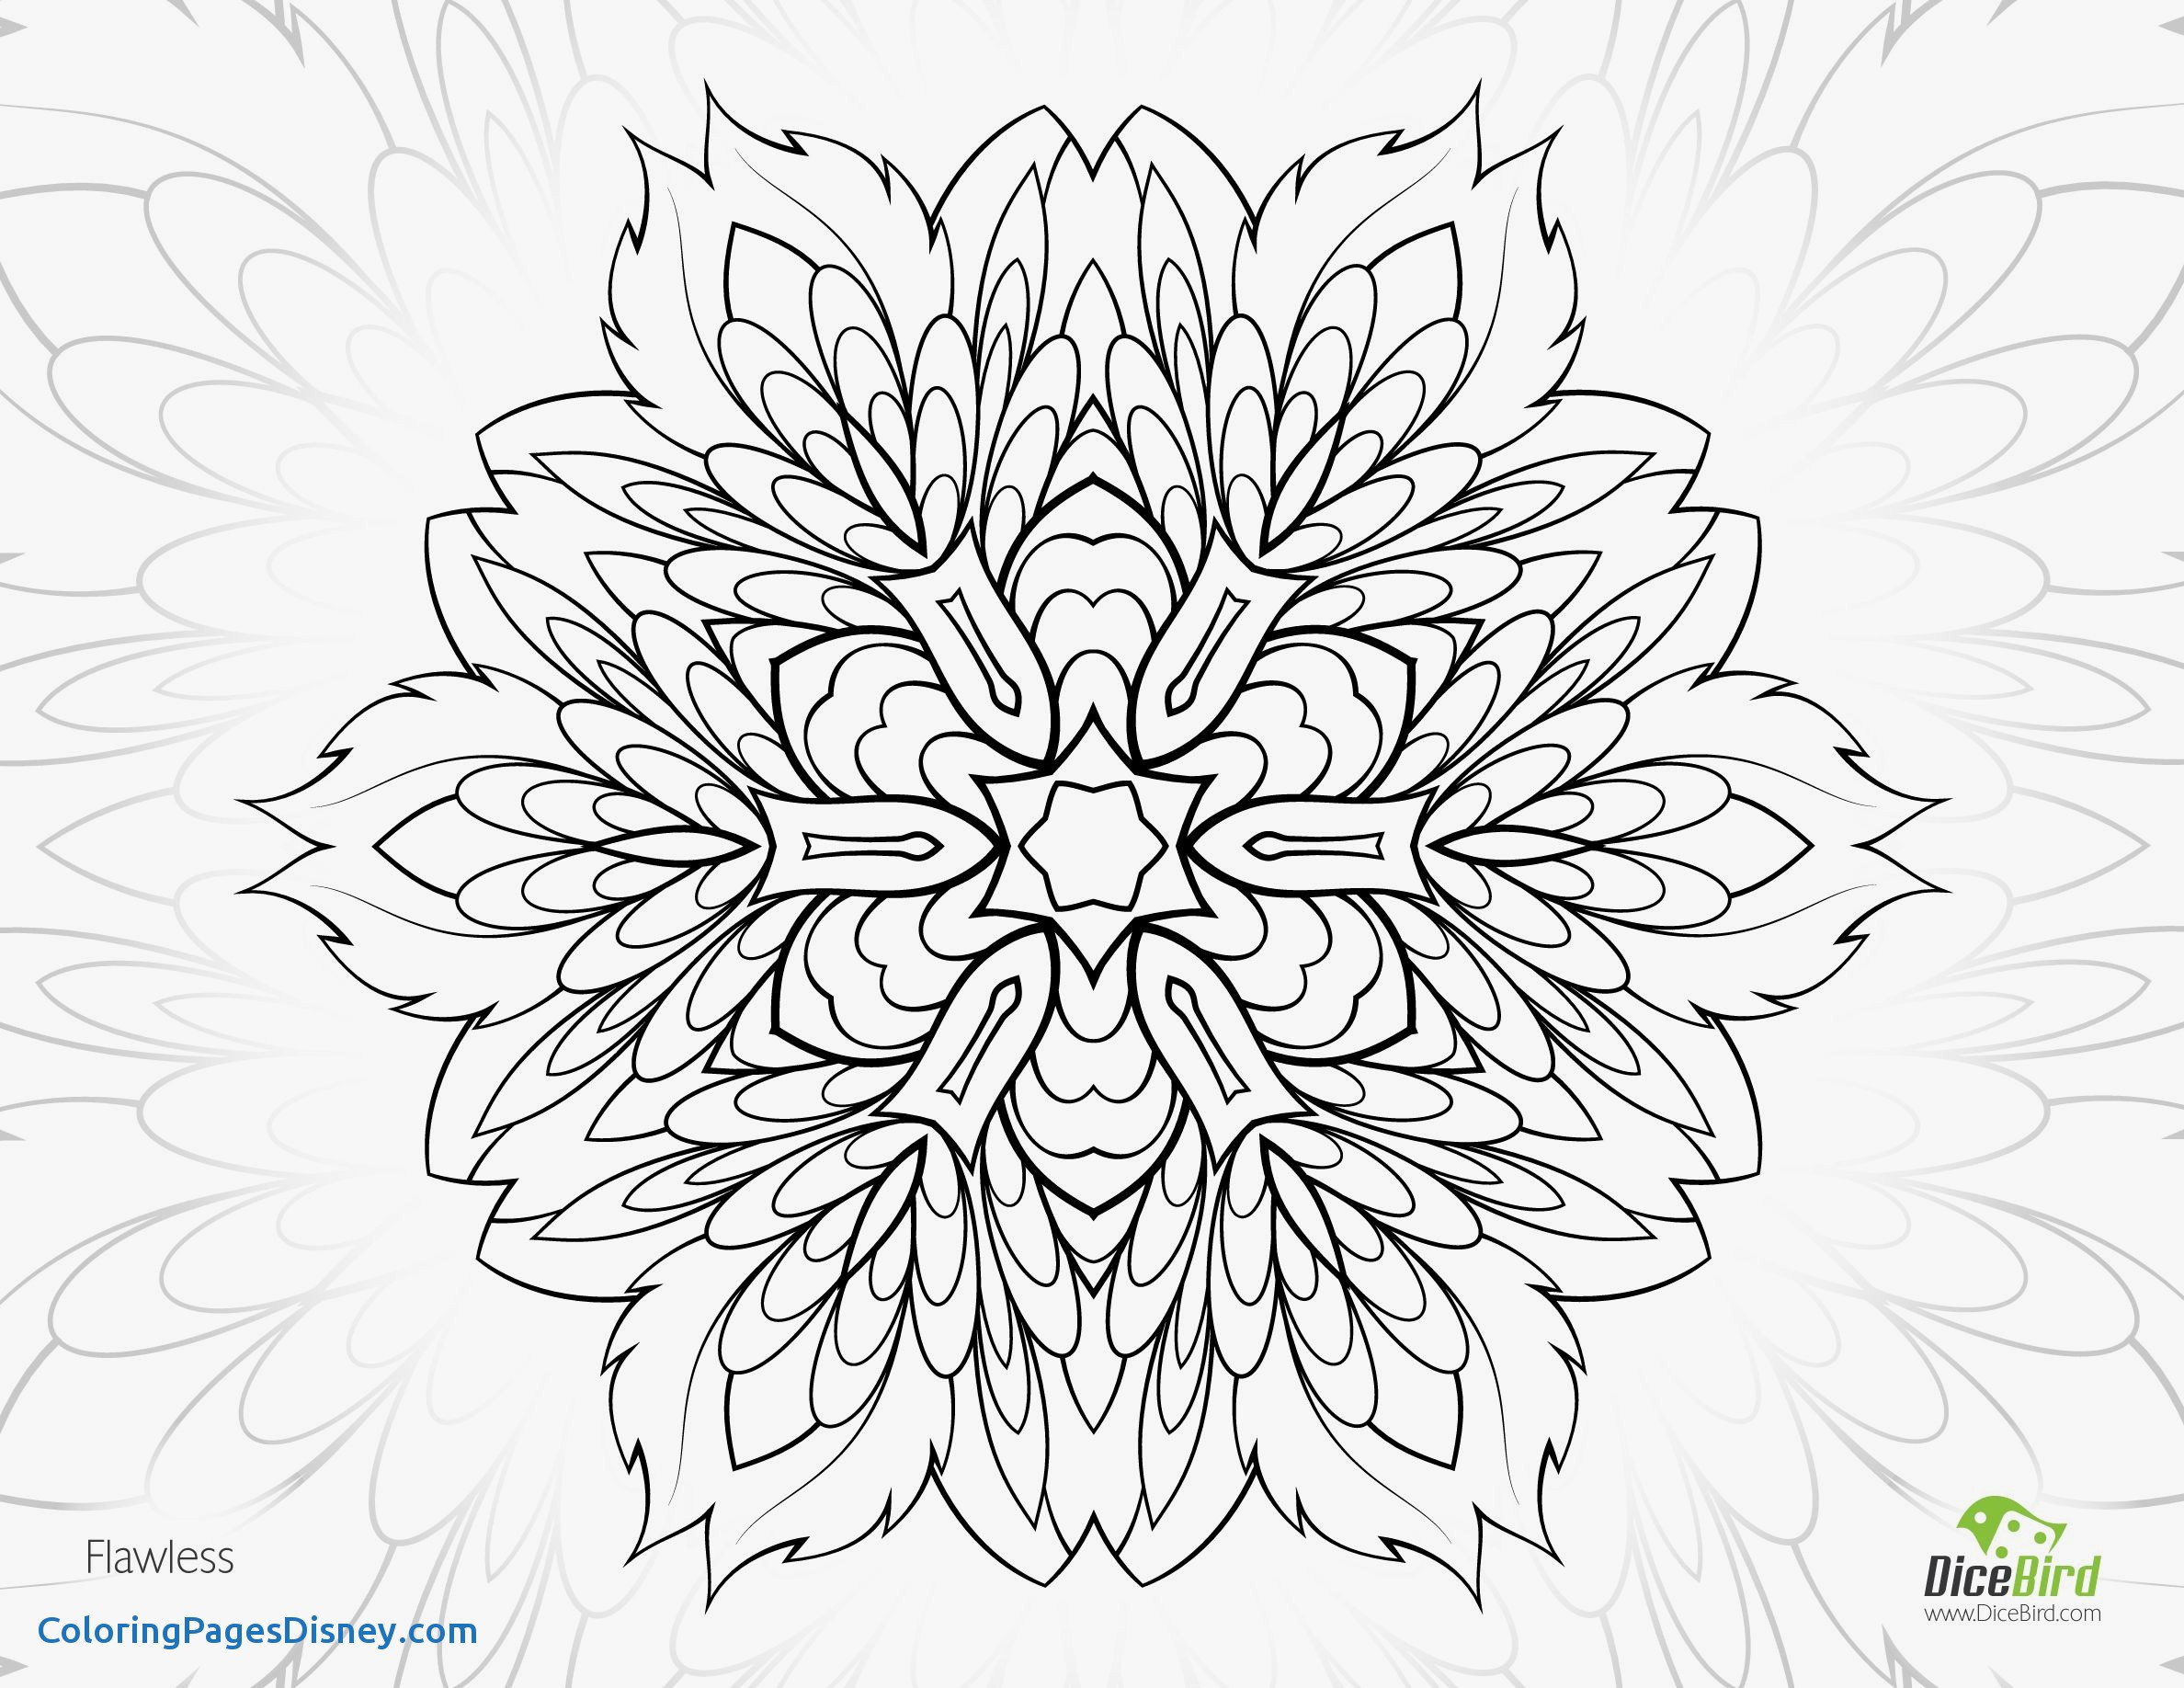 Dahlia Coloring Pages Fresh Dahlia Flower Dicebird Letter - Coloring ...